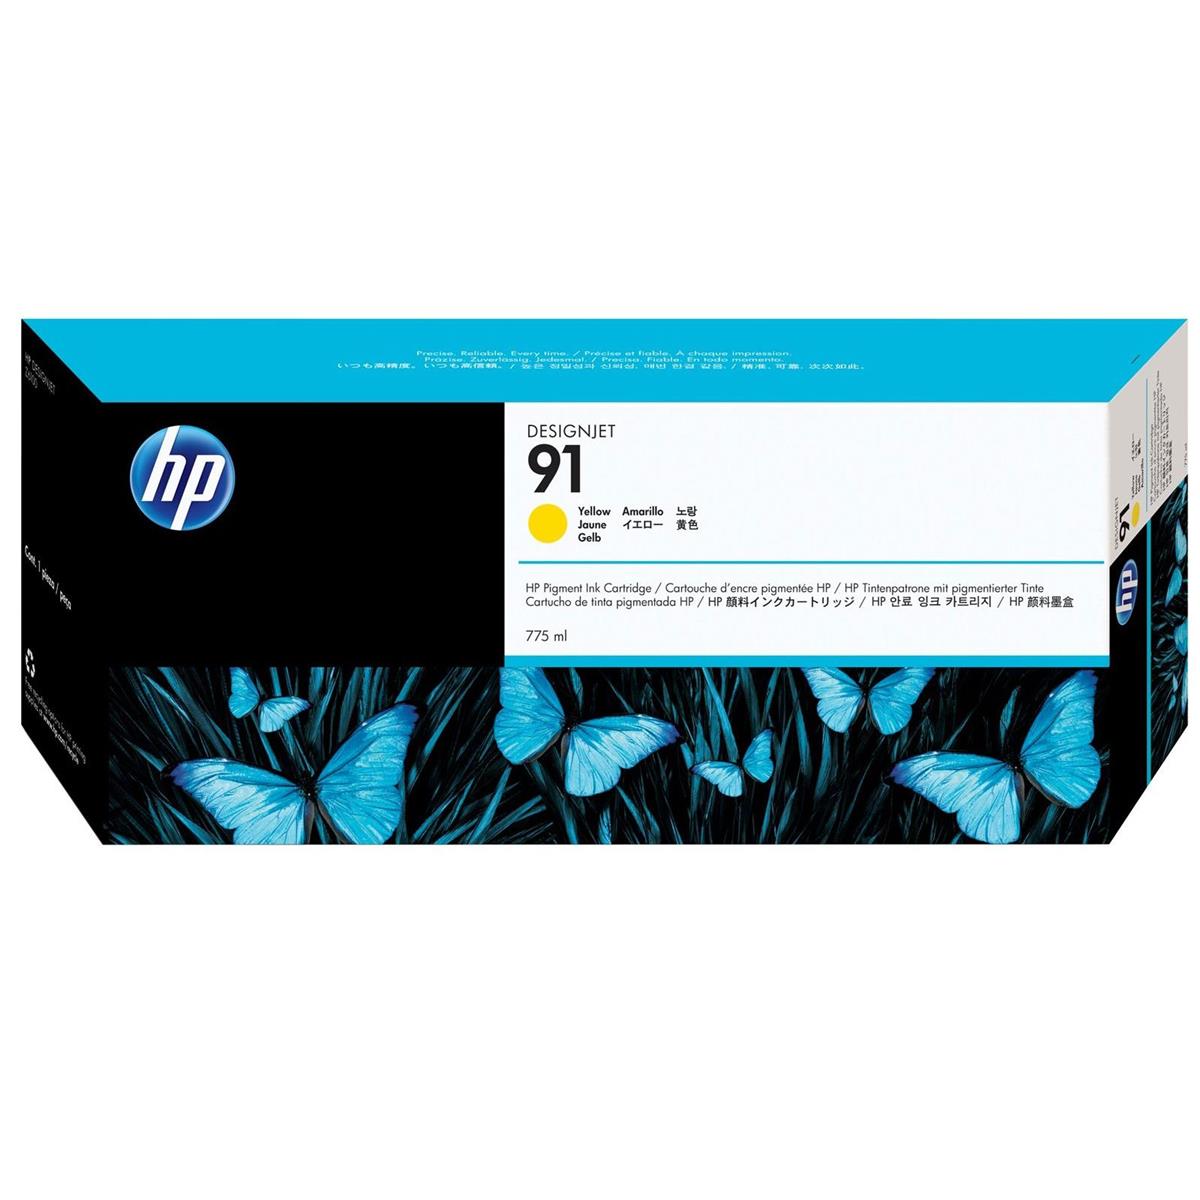 Image of HP #91 Yellow Ink Cartridge with Vivera Ink